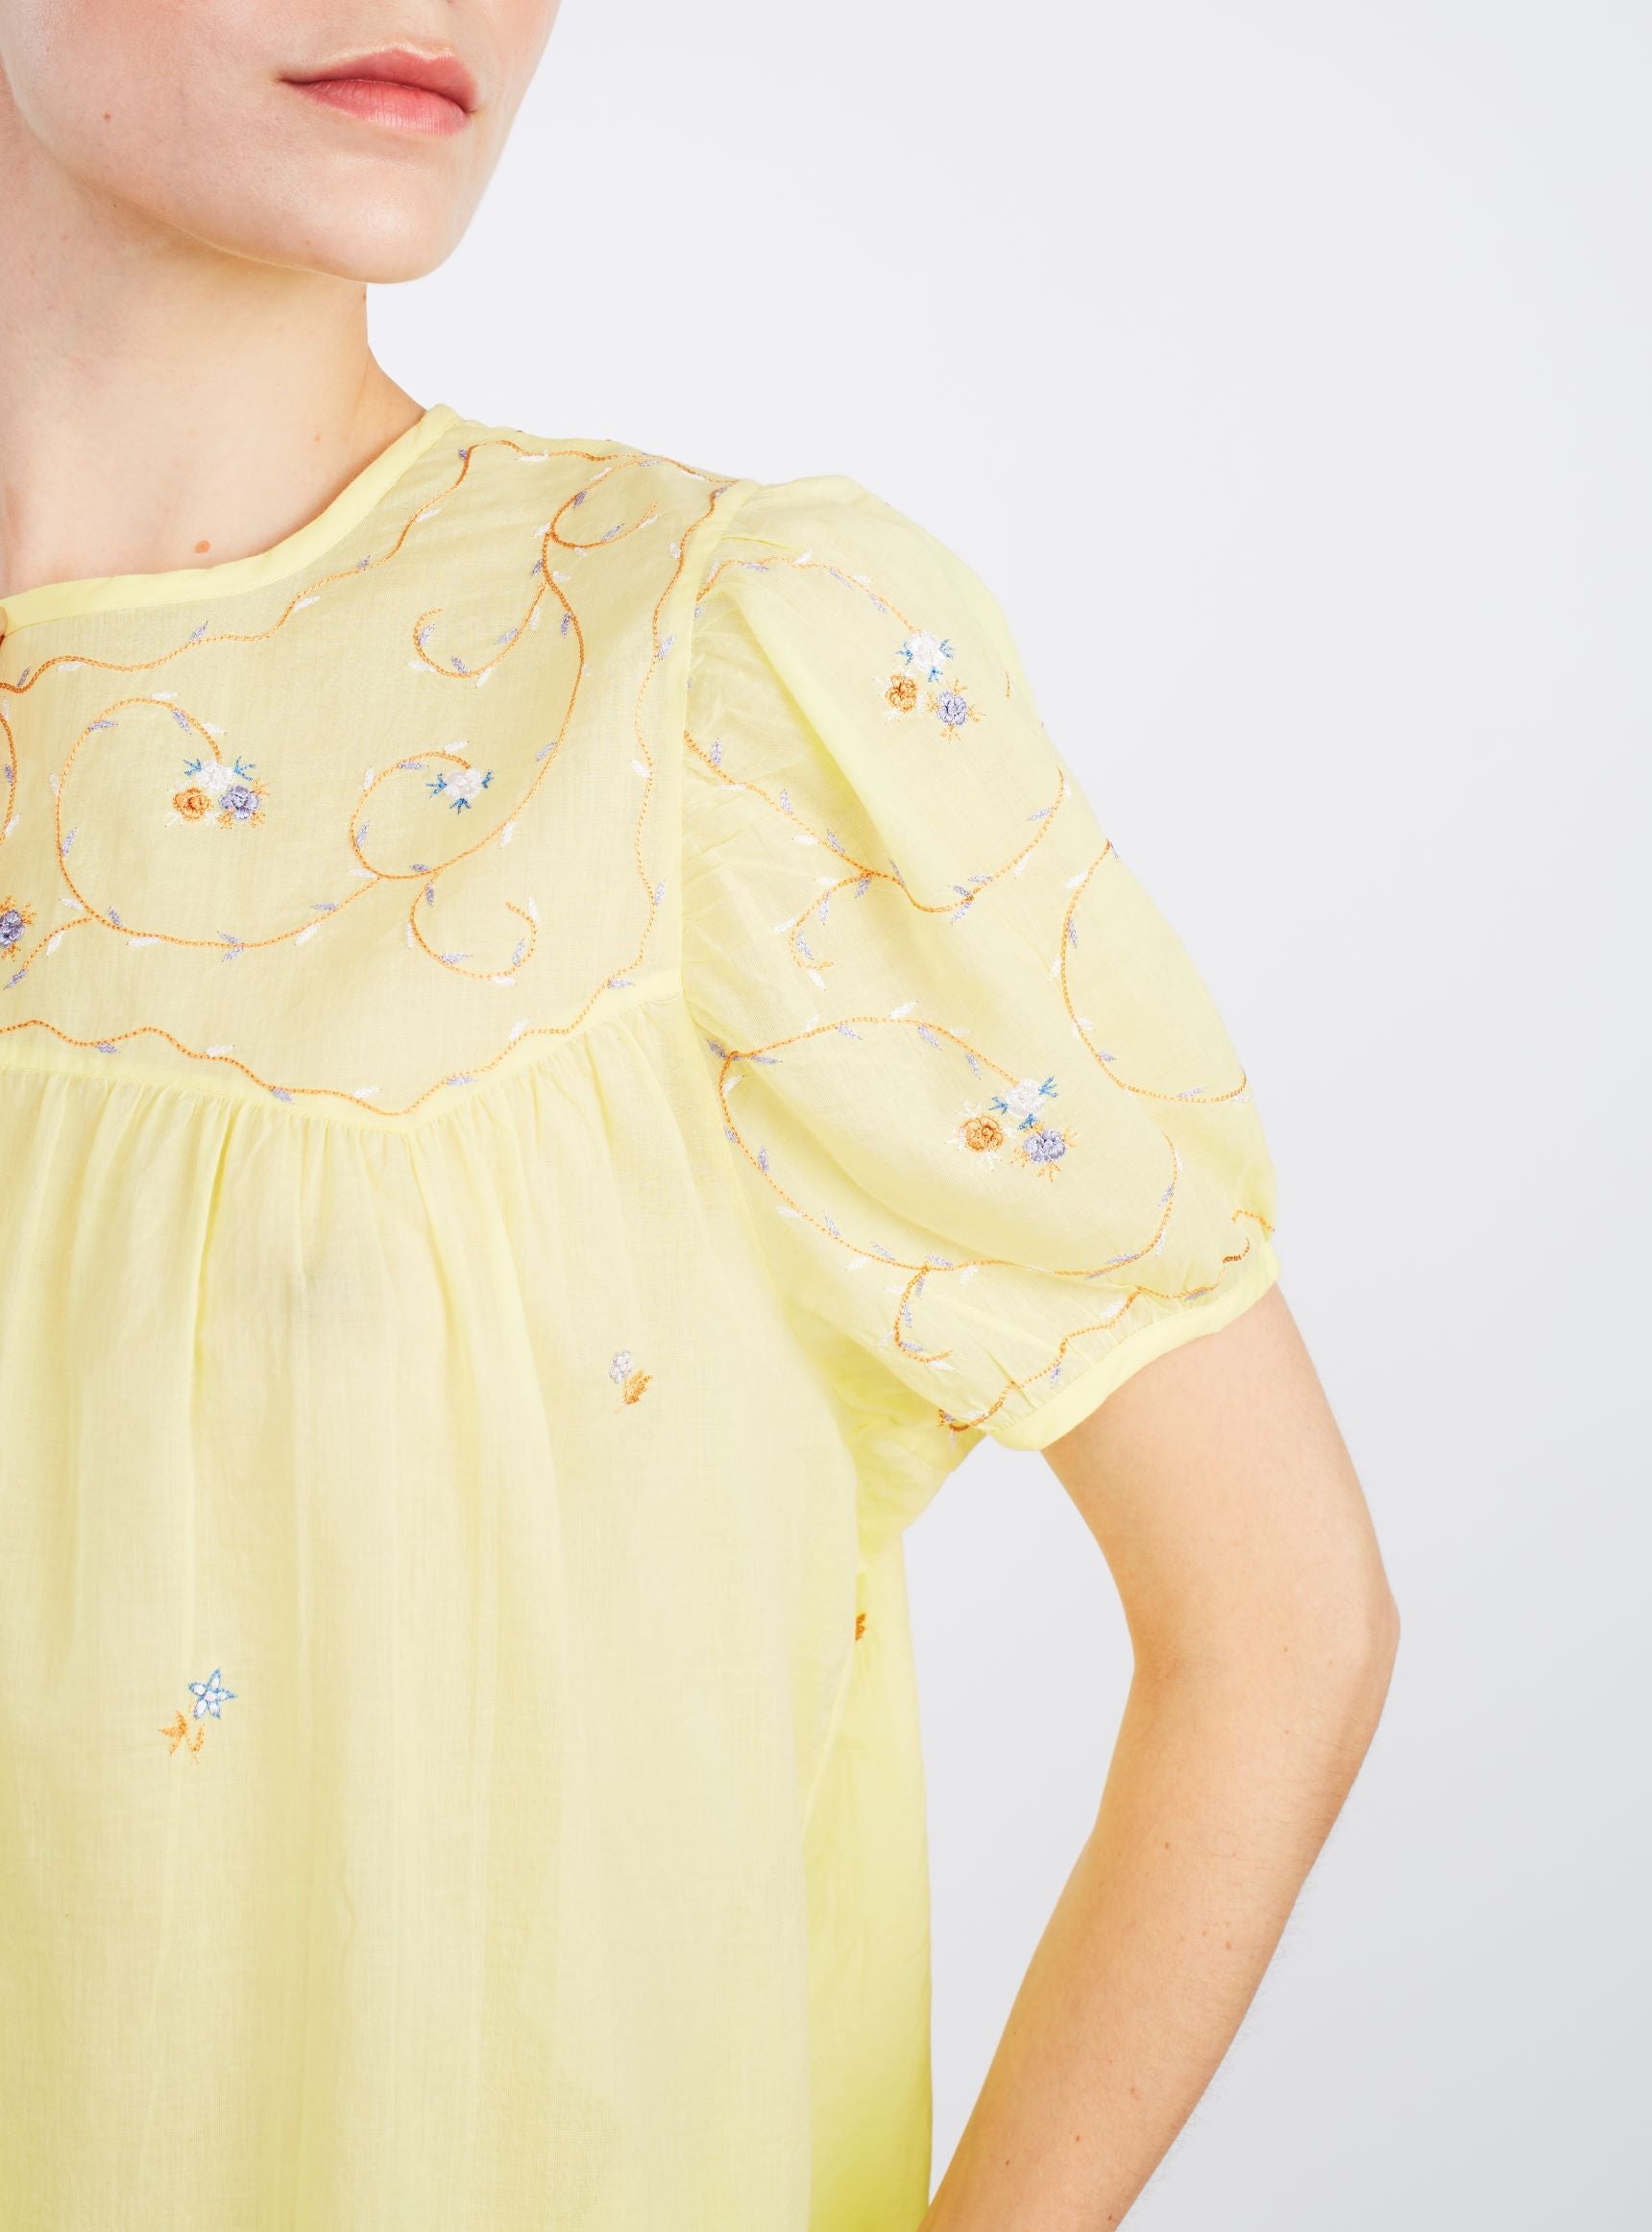 Sleeve detail of Olympia Sweet Lemon Top by Thierry Colson